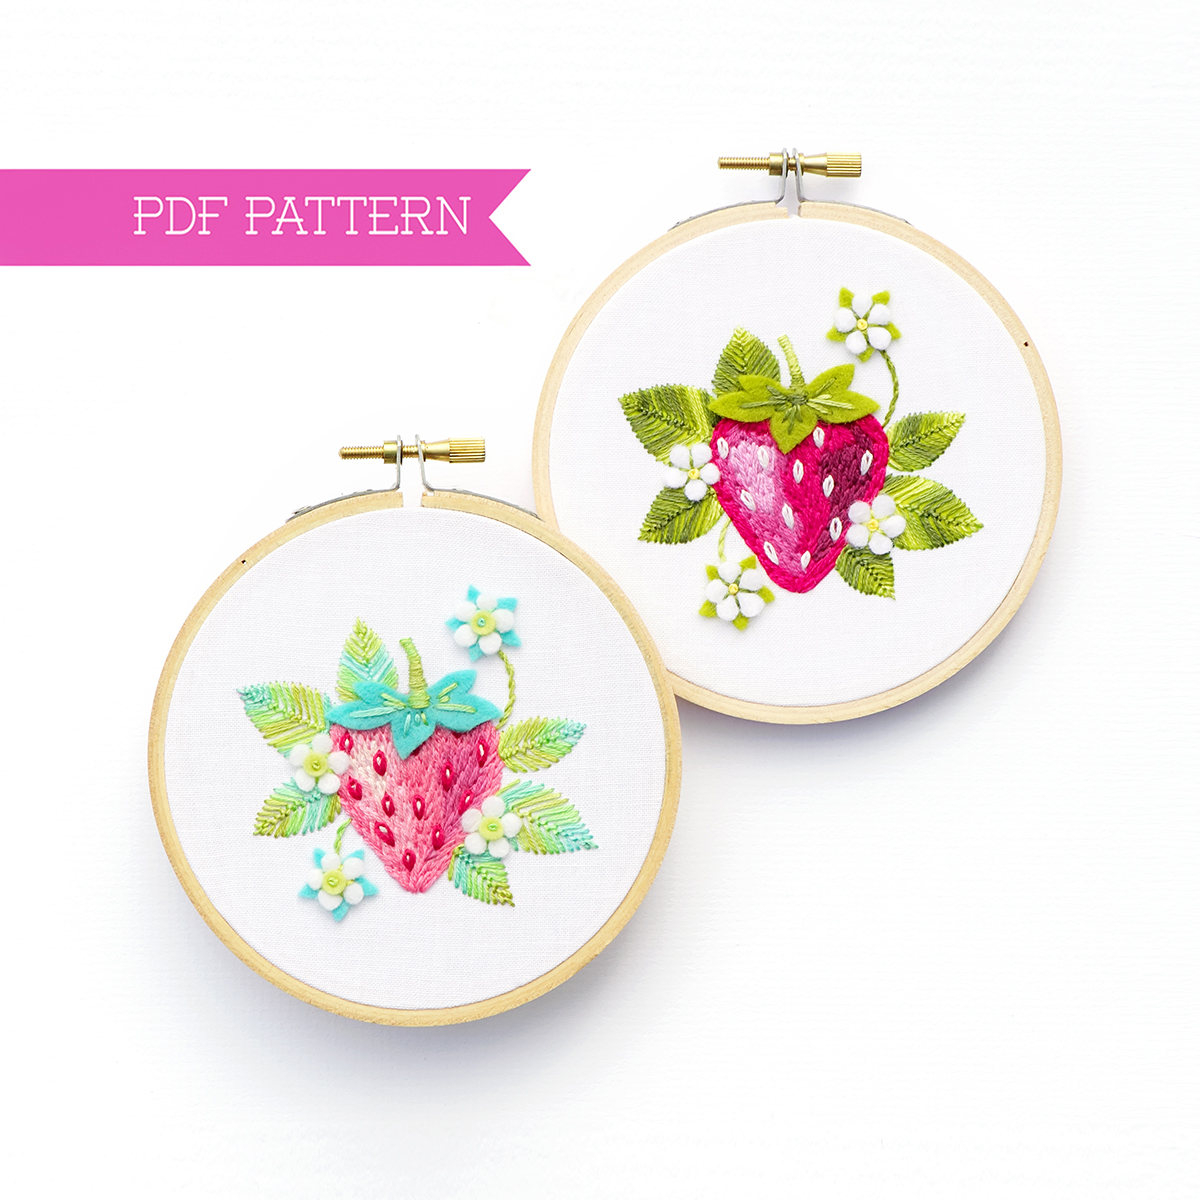 Patterns For Embroidery Embroidery Pattern Pdf Strawberry Pattern Hand Embroidery Patterns Embroidery Pattern Embroidery Pdf Strawberry Hoop Art Food Art